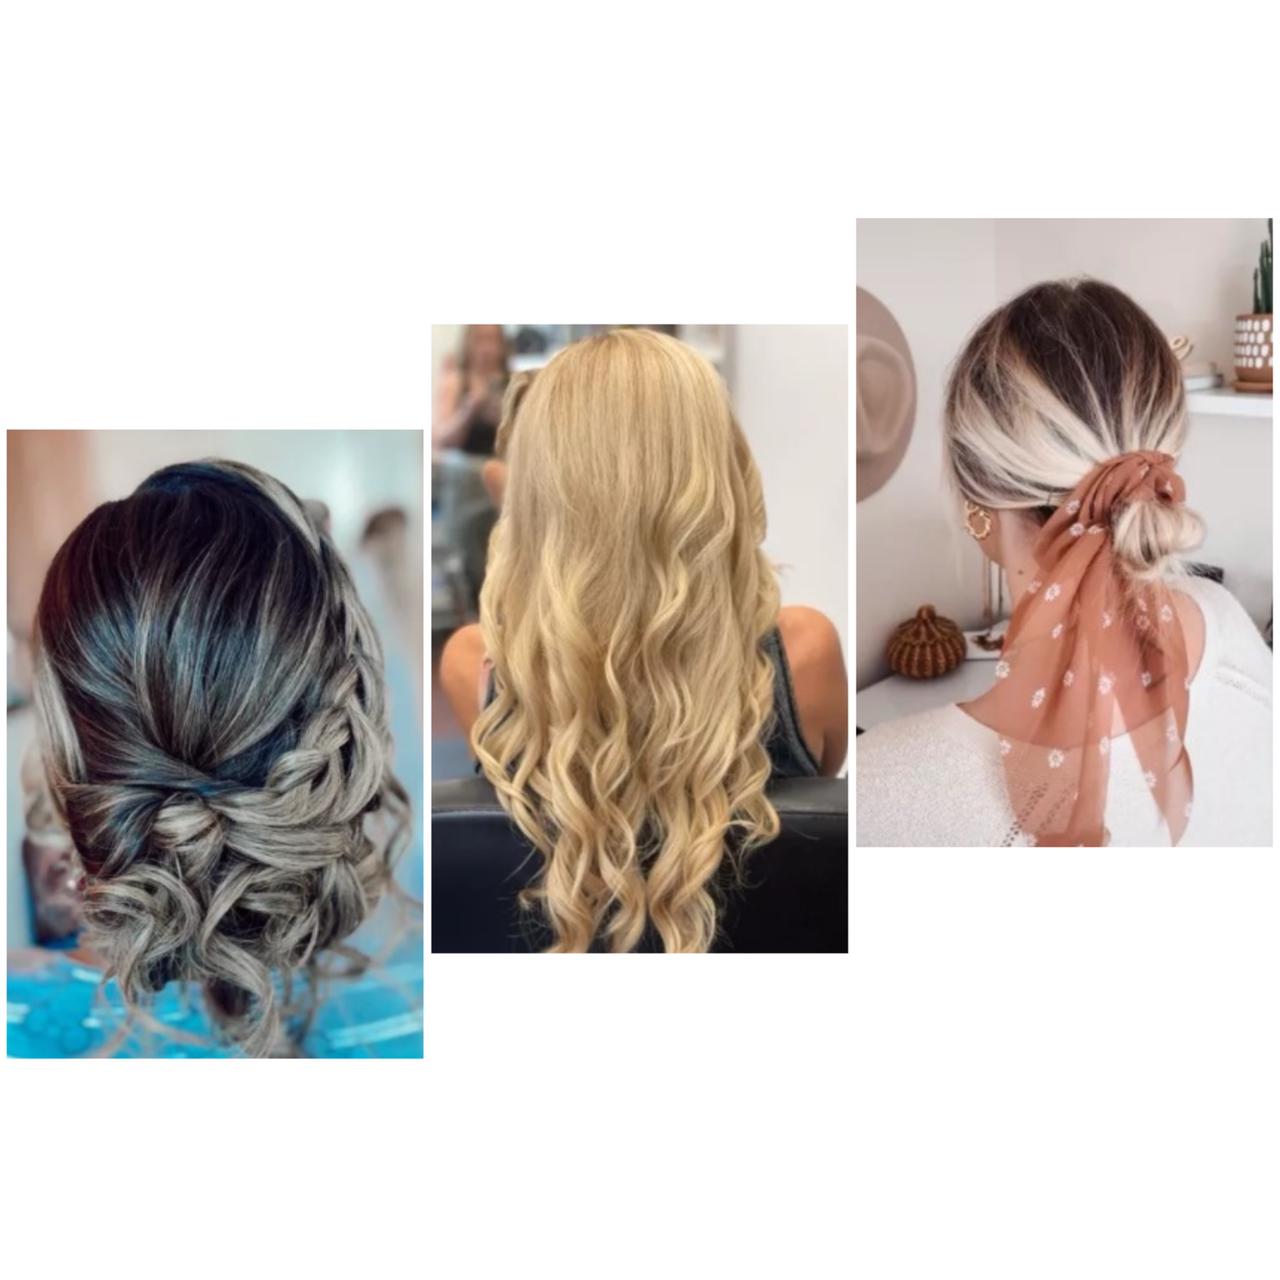 Hairstyles for Tea Parties